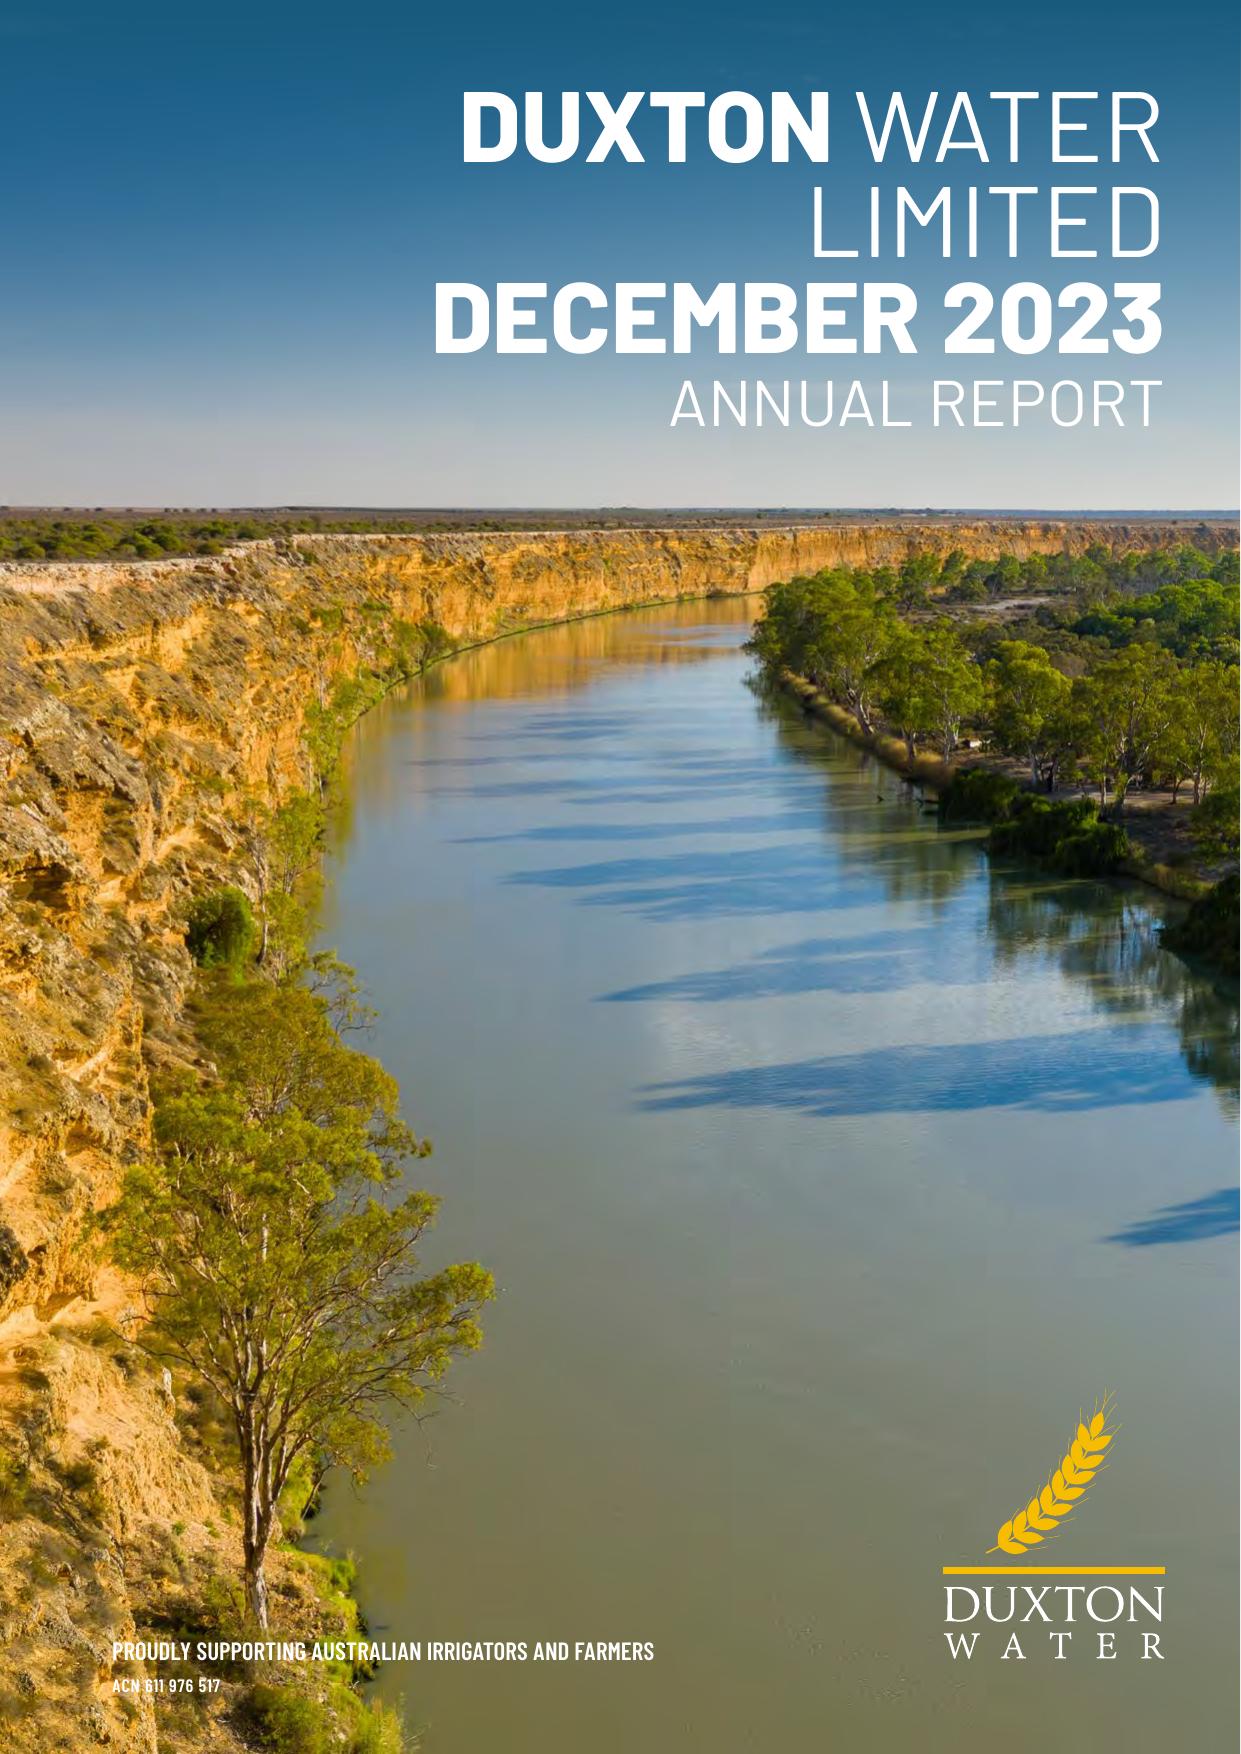 DUXTONWATER 2023 Annual Report